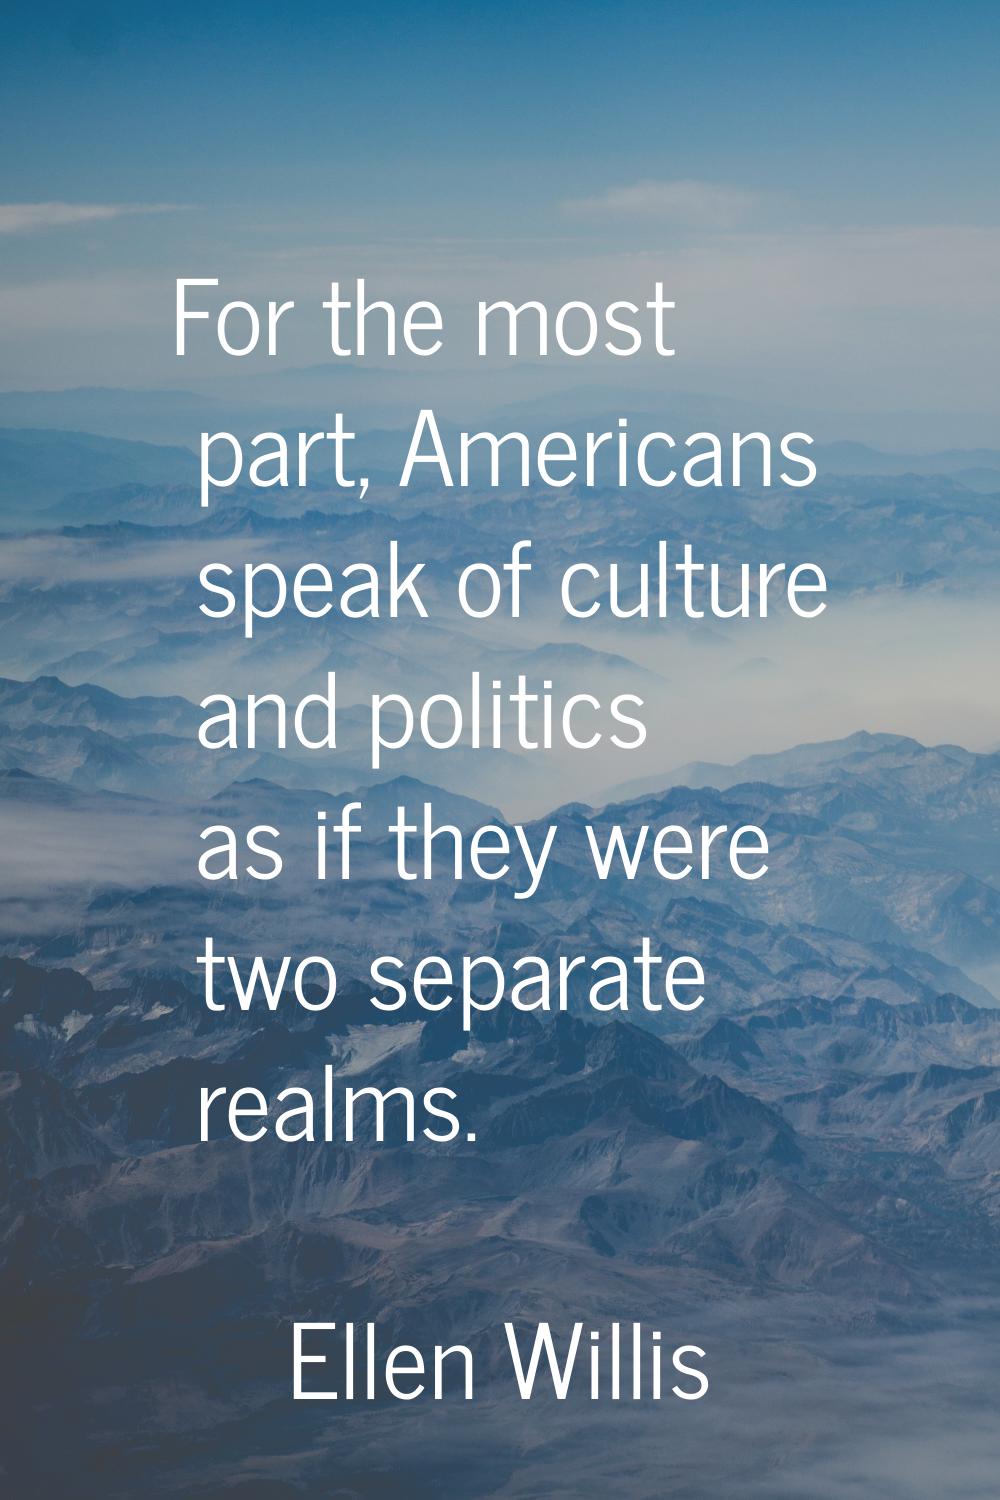 For the most part, Americans speak of culture and politics as if they were two separate realms.